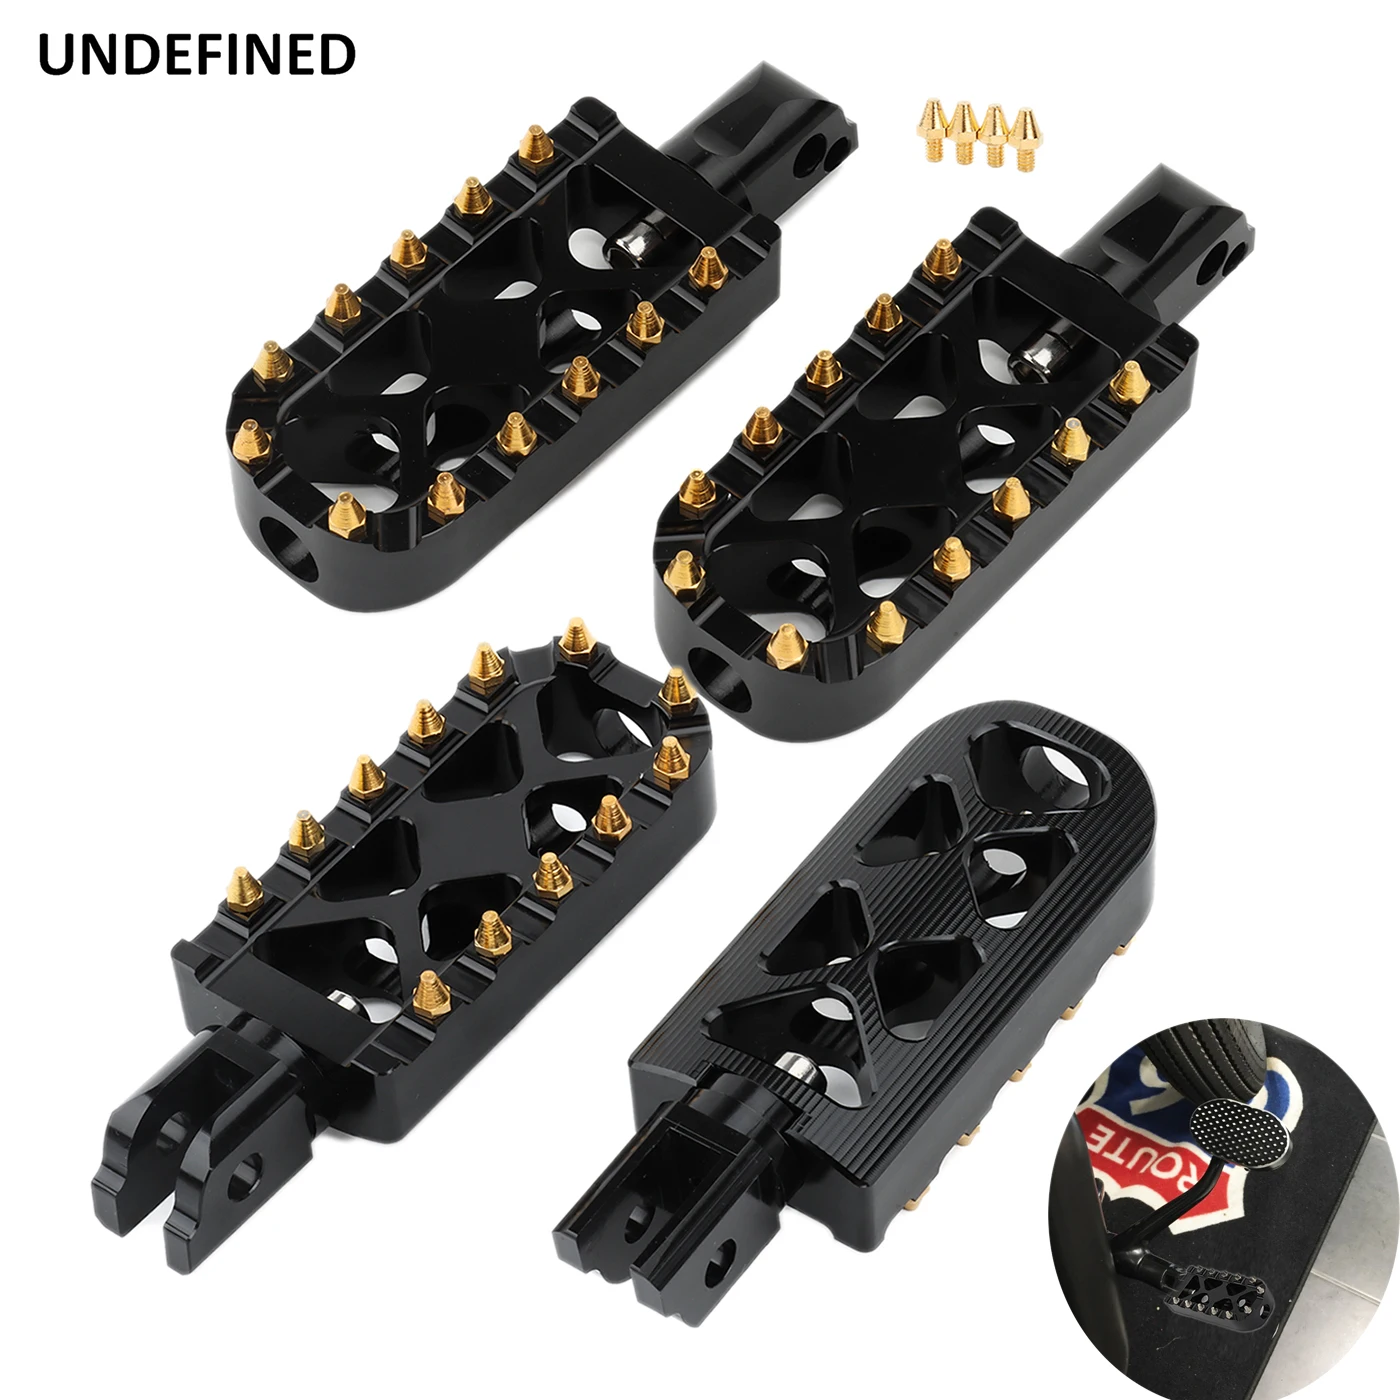 Wide MX Style Foot Pegs Floorboard Pedals For Harley Softail Street Bob Breakout